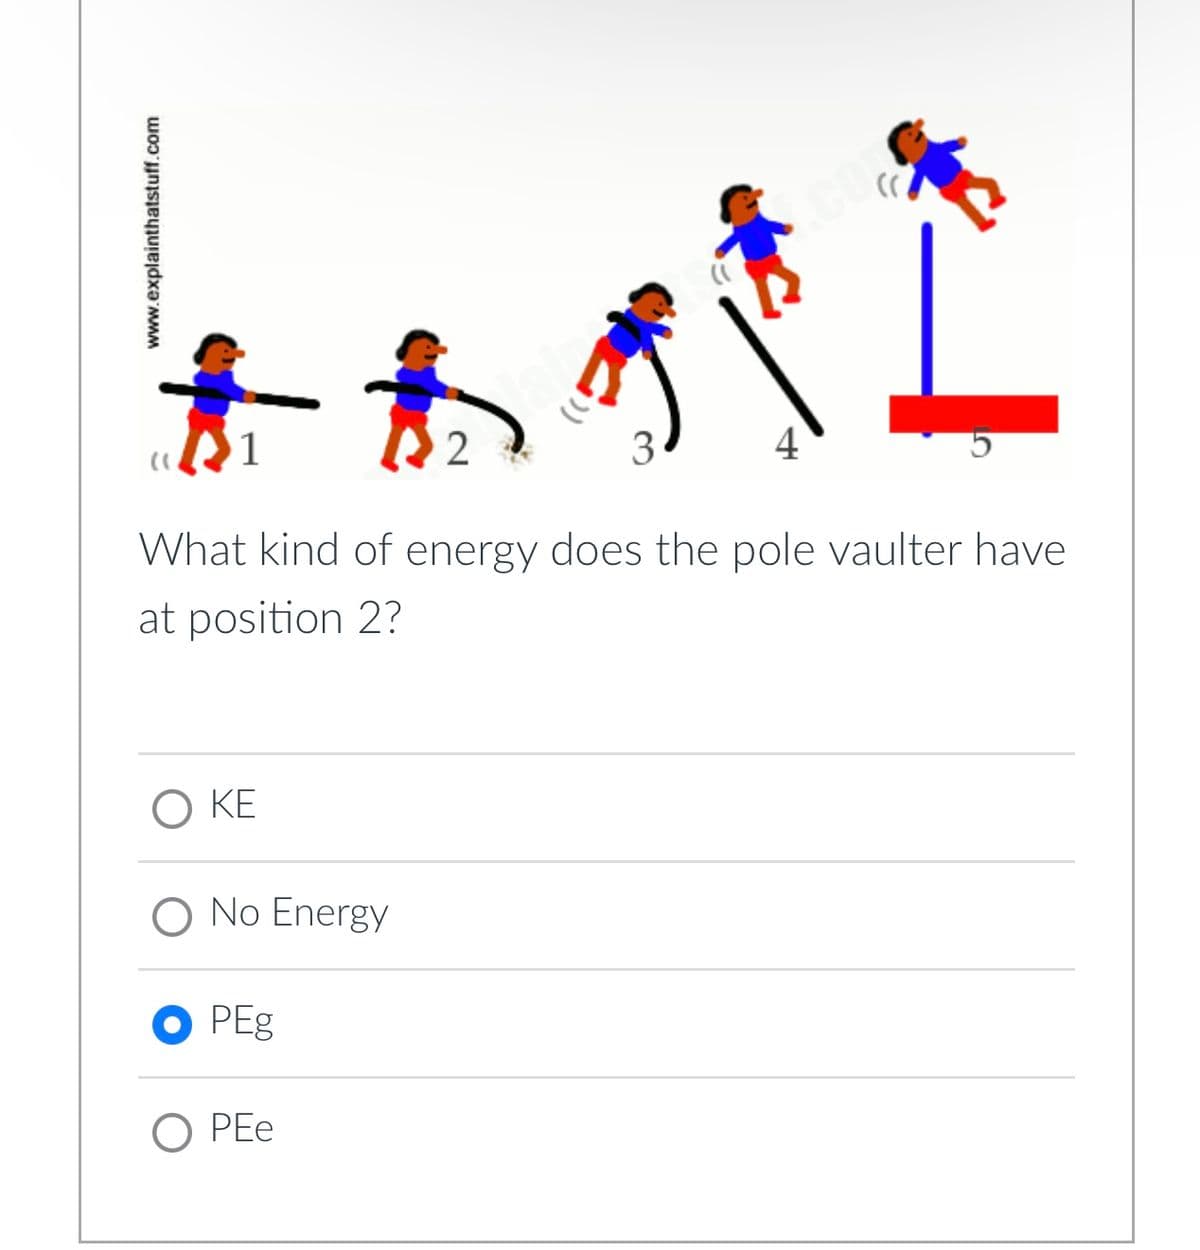 besti
2
3
What kind of energy does the pole vaulter have
at position 2?
O KE
No Energy
PEg
4
O PEe